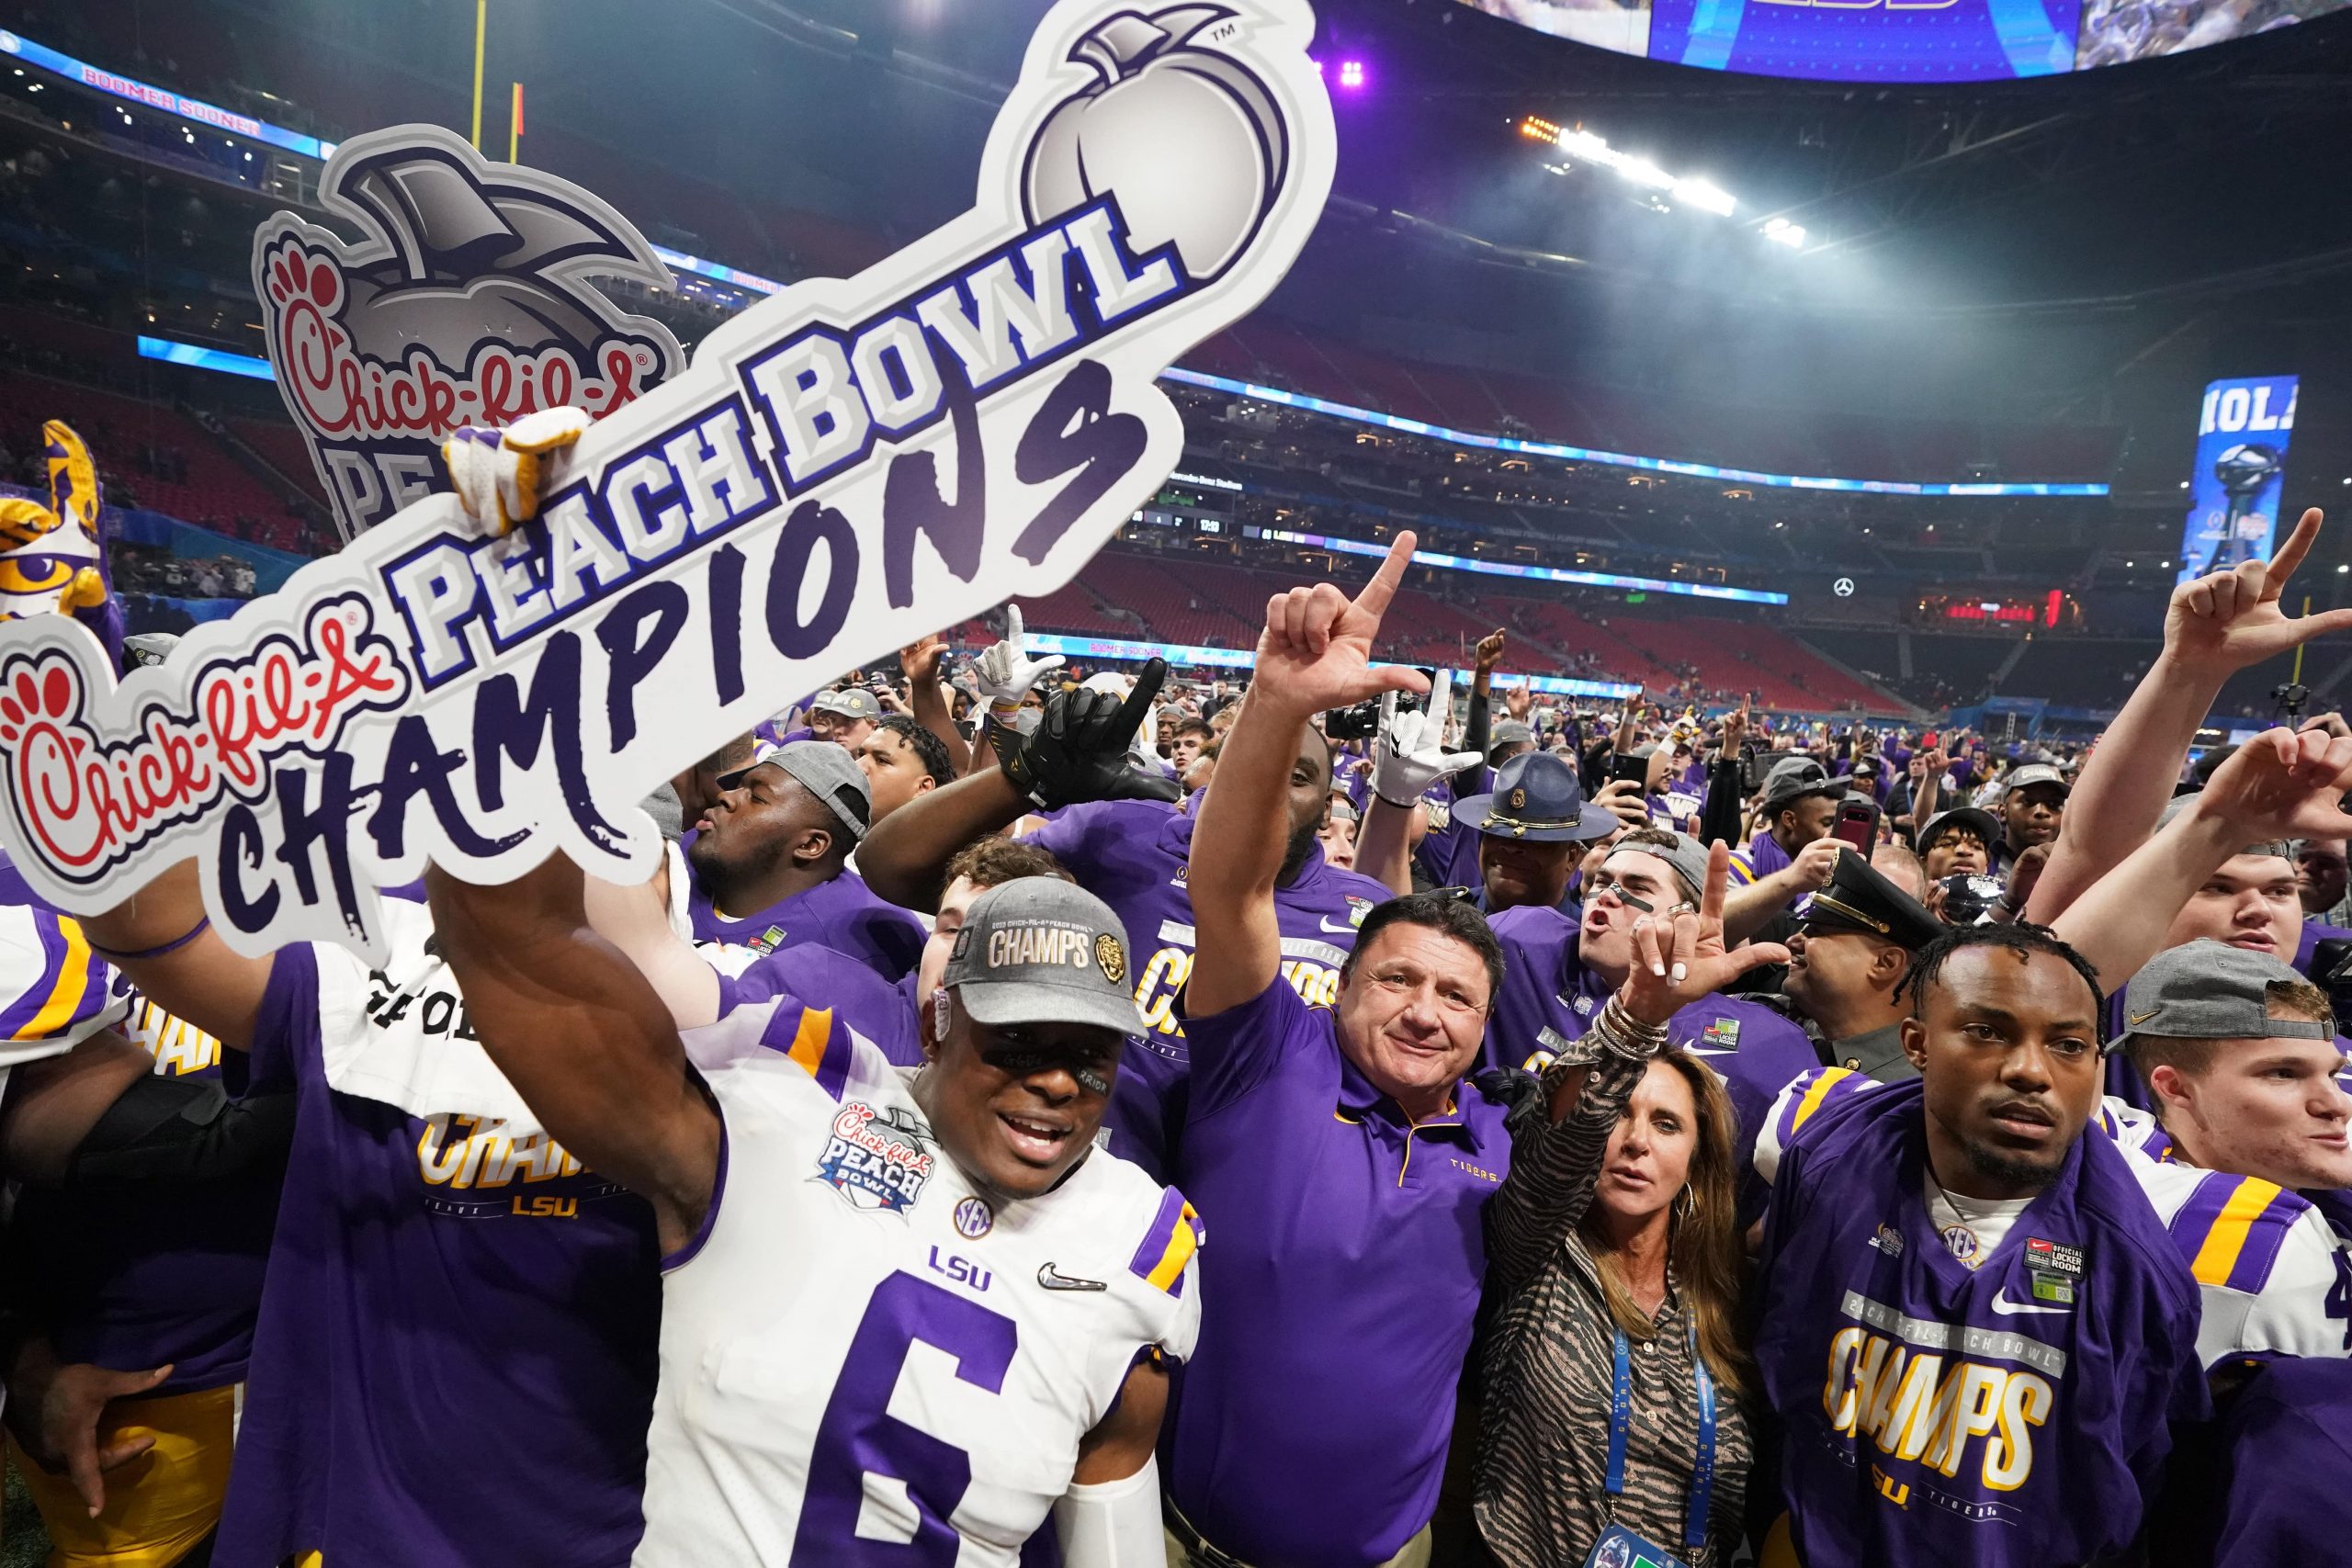 LSU Tigers head coach Ed Orgeron celebrates with his players and his wife Kelly after defeating the Oklahoma Sooners in the 2019 Peach Bowl college football playoff semifinal game at Mercedes-Benz Stadium in Atlanta, Georgia.